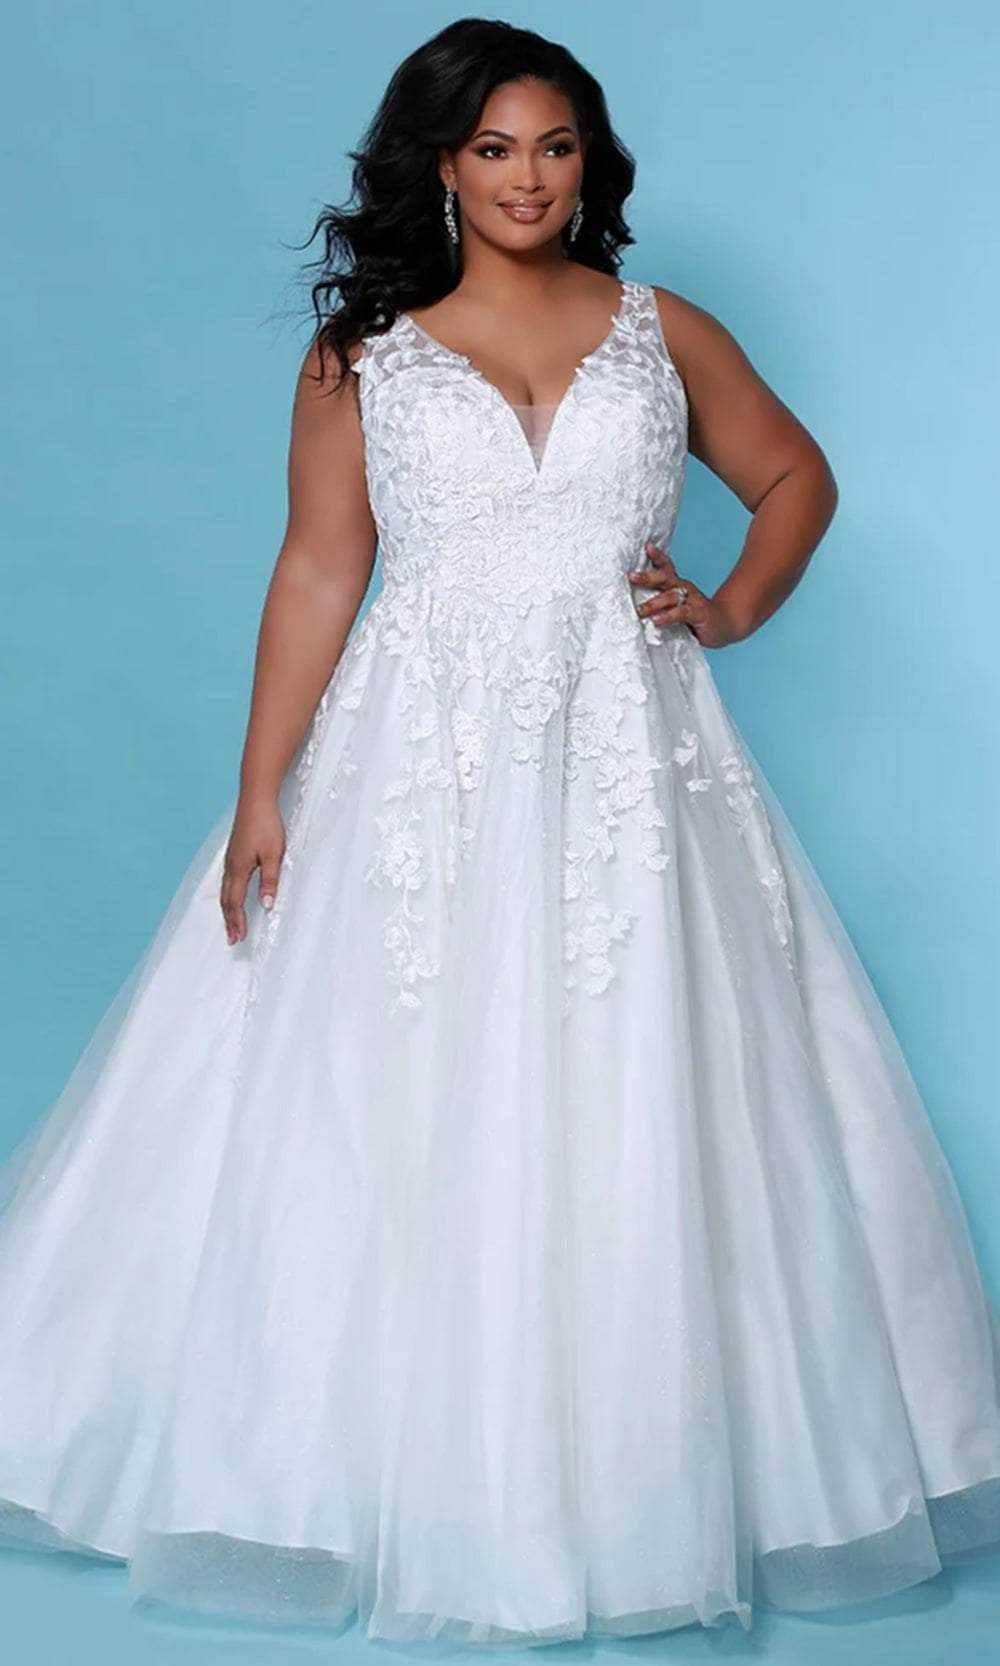 Sydney's Closet Bridal, Sydney's Closet Bridal - SC5259 Floral Embroidered Bridal Gown